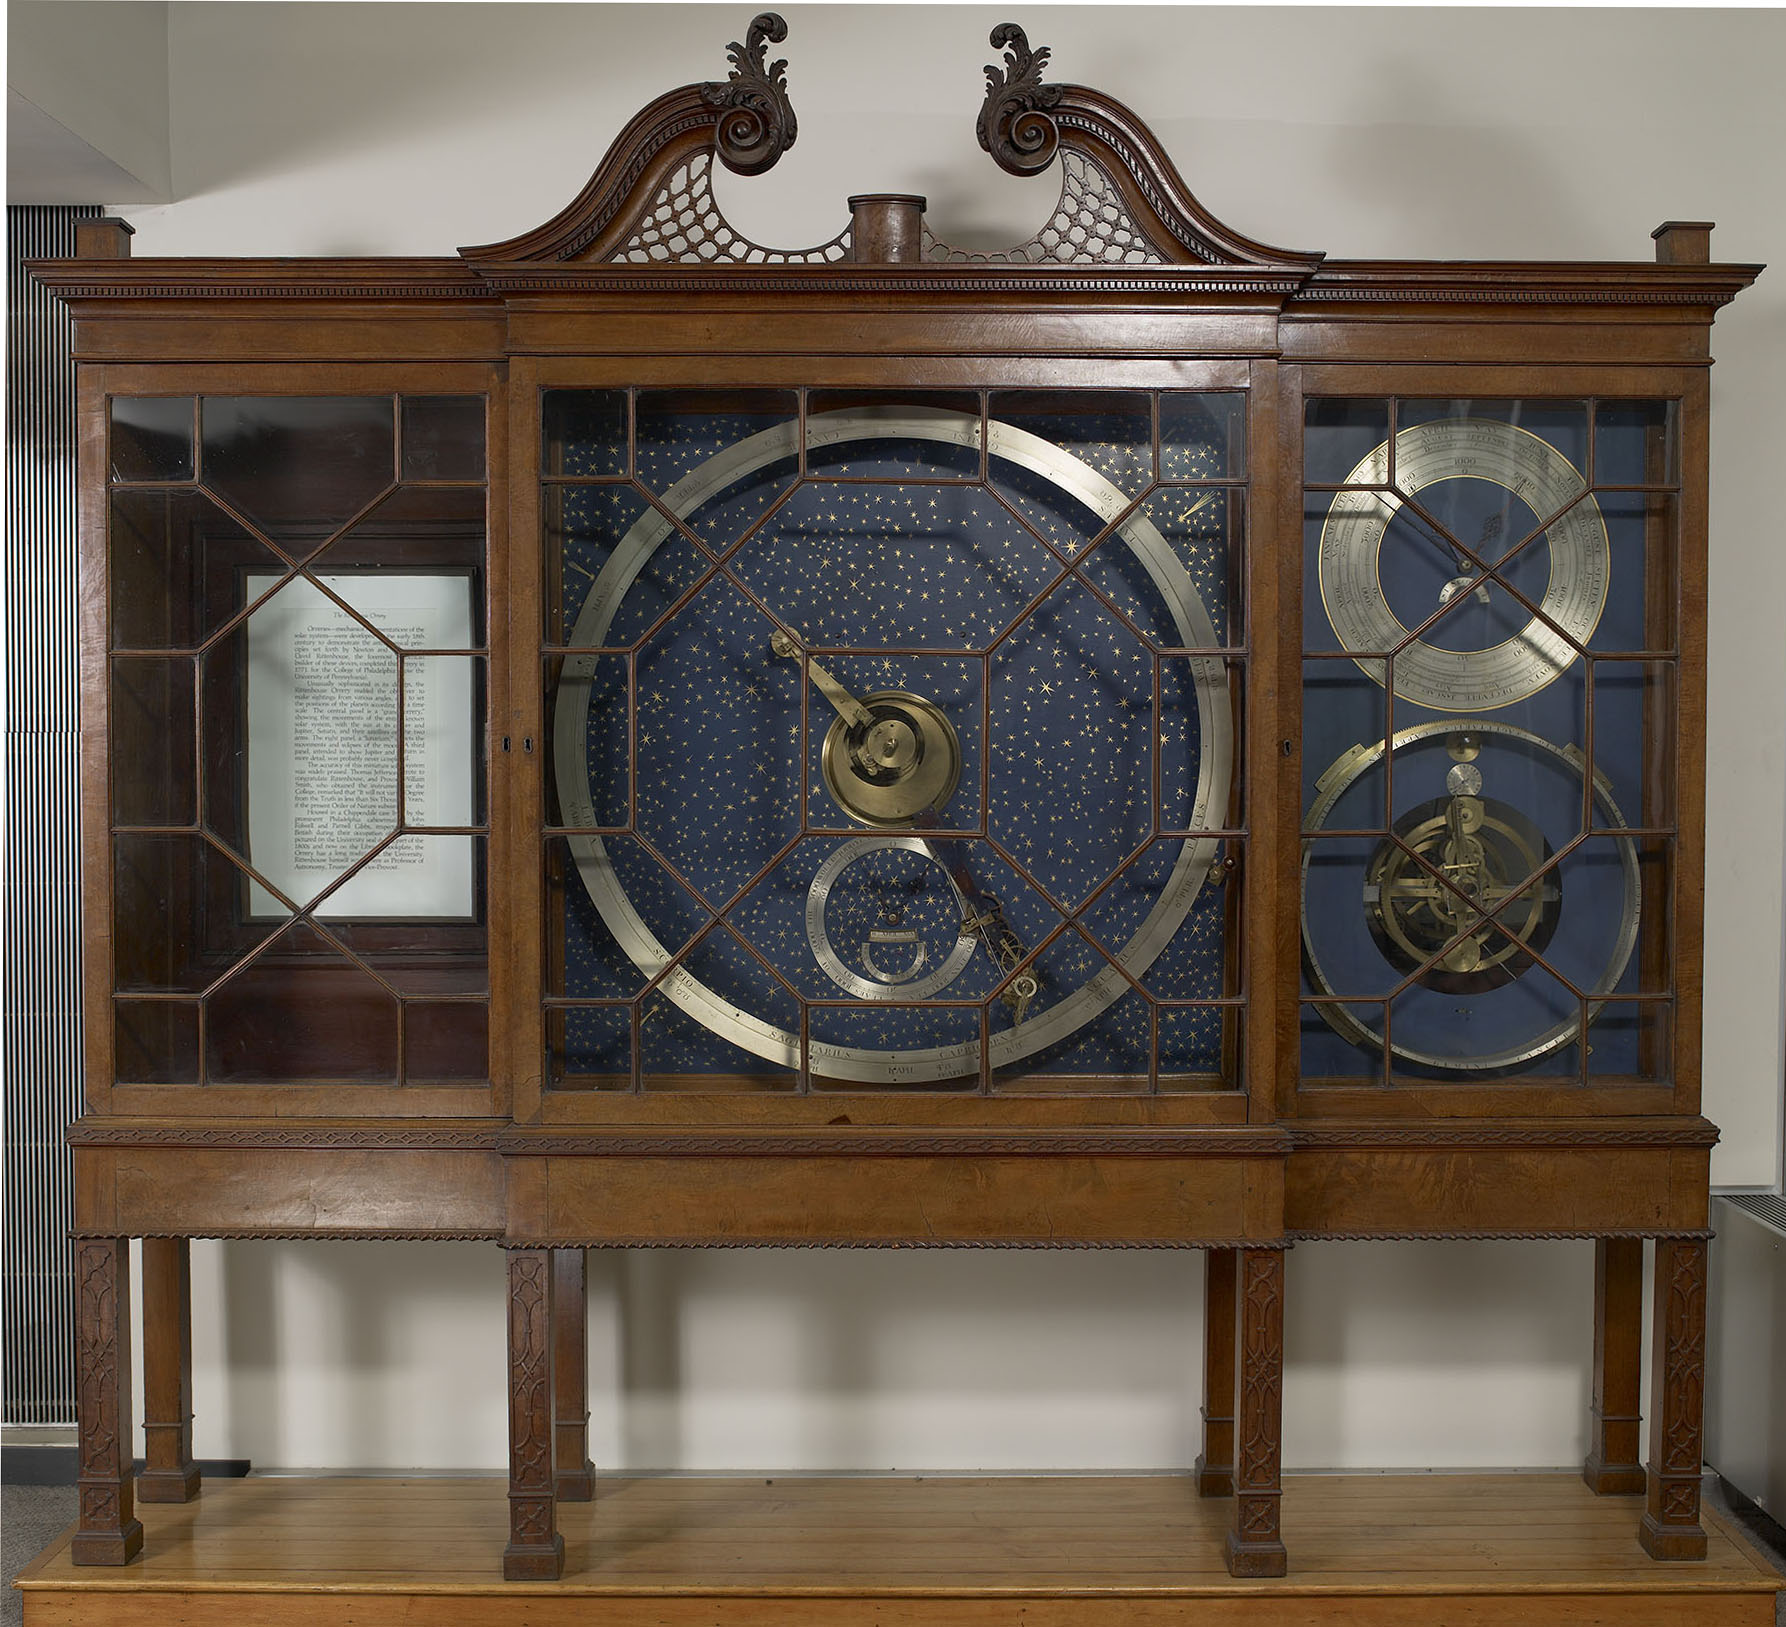 Rittenhouse Orrery (photographed 2006), full view